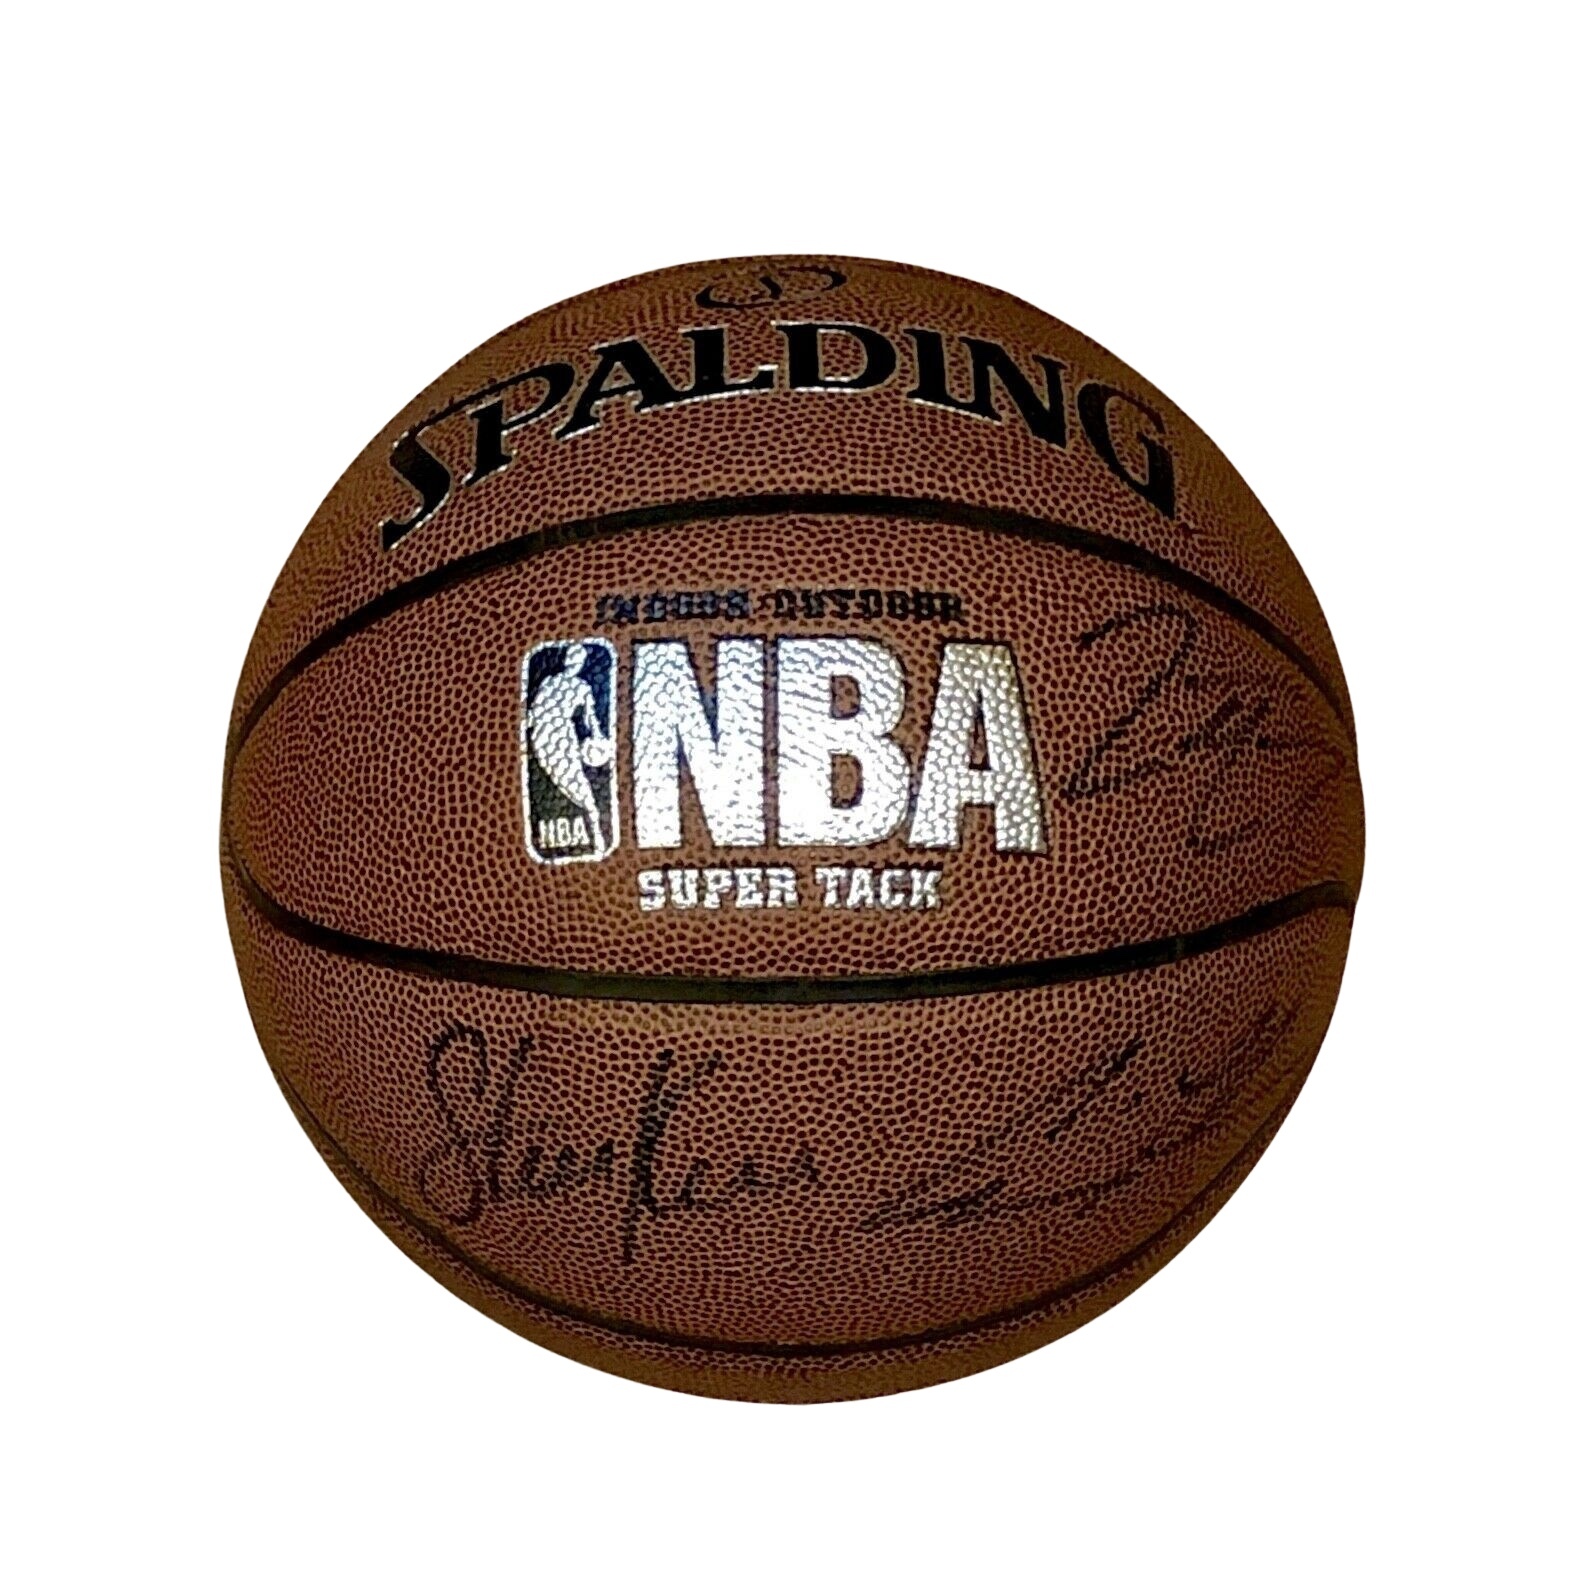 2017-18  G.S. WARRIORS TEAM SIGNED Autographed BASKETBALL NBA CHAMPS w/COA CURRY - $575.00